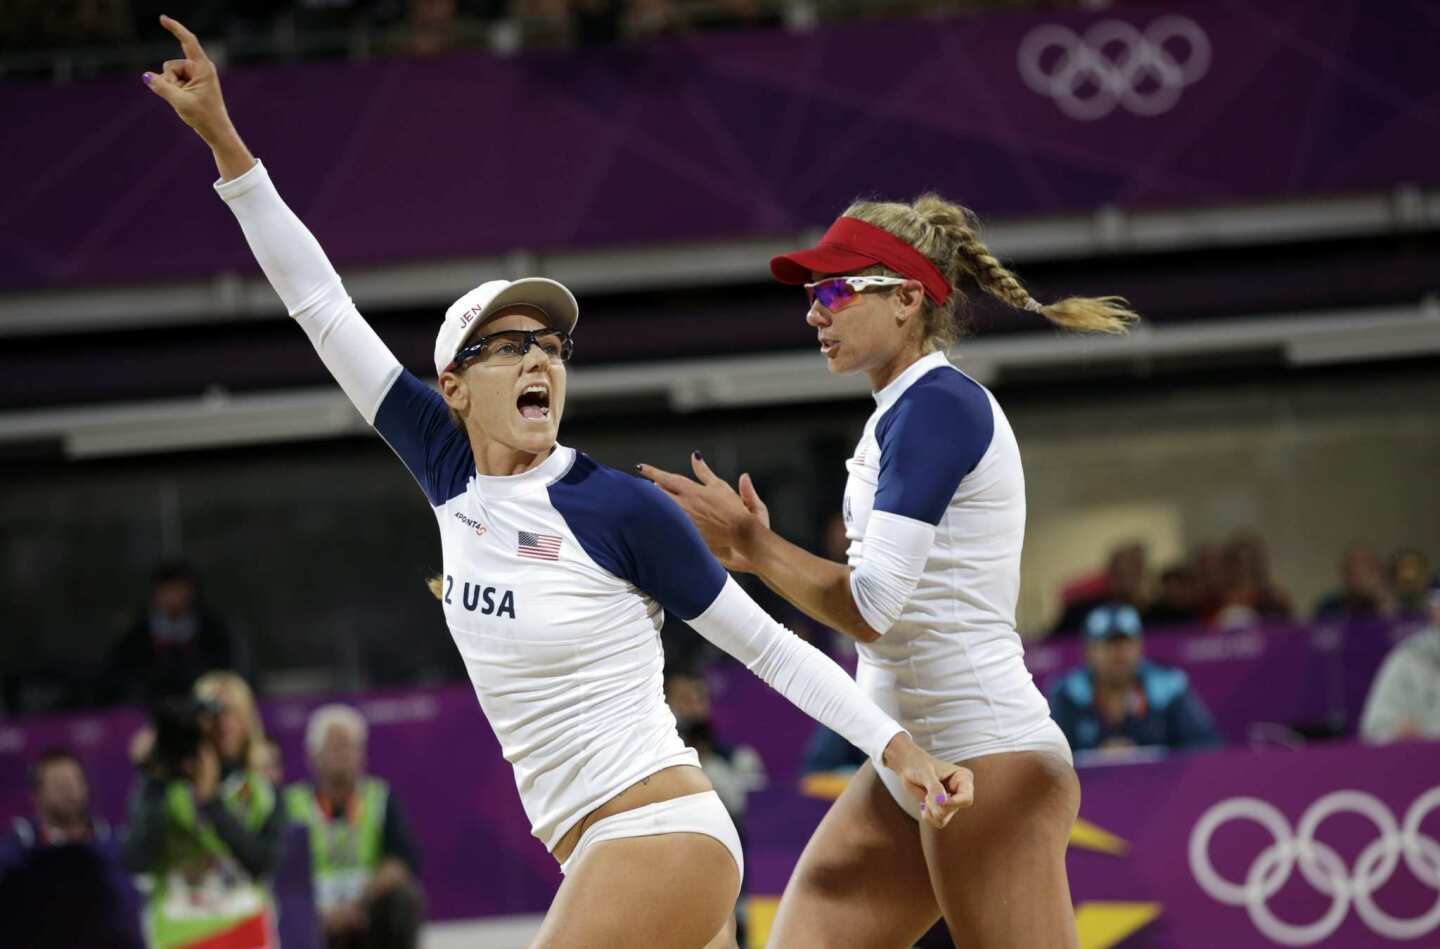 Jennifer Kessy, left, and April Ross of the U.S. cheer during their quarterfinal match against the Czech Republic. Both beach volleyball stars played for USC, though in different years.